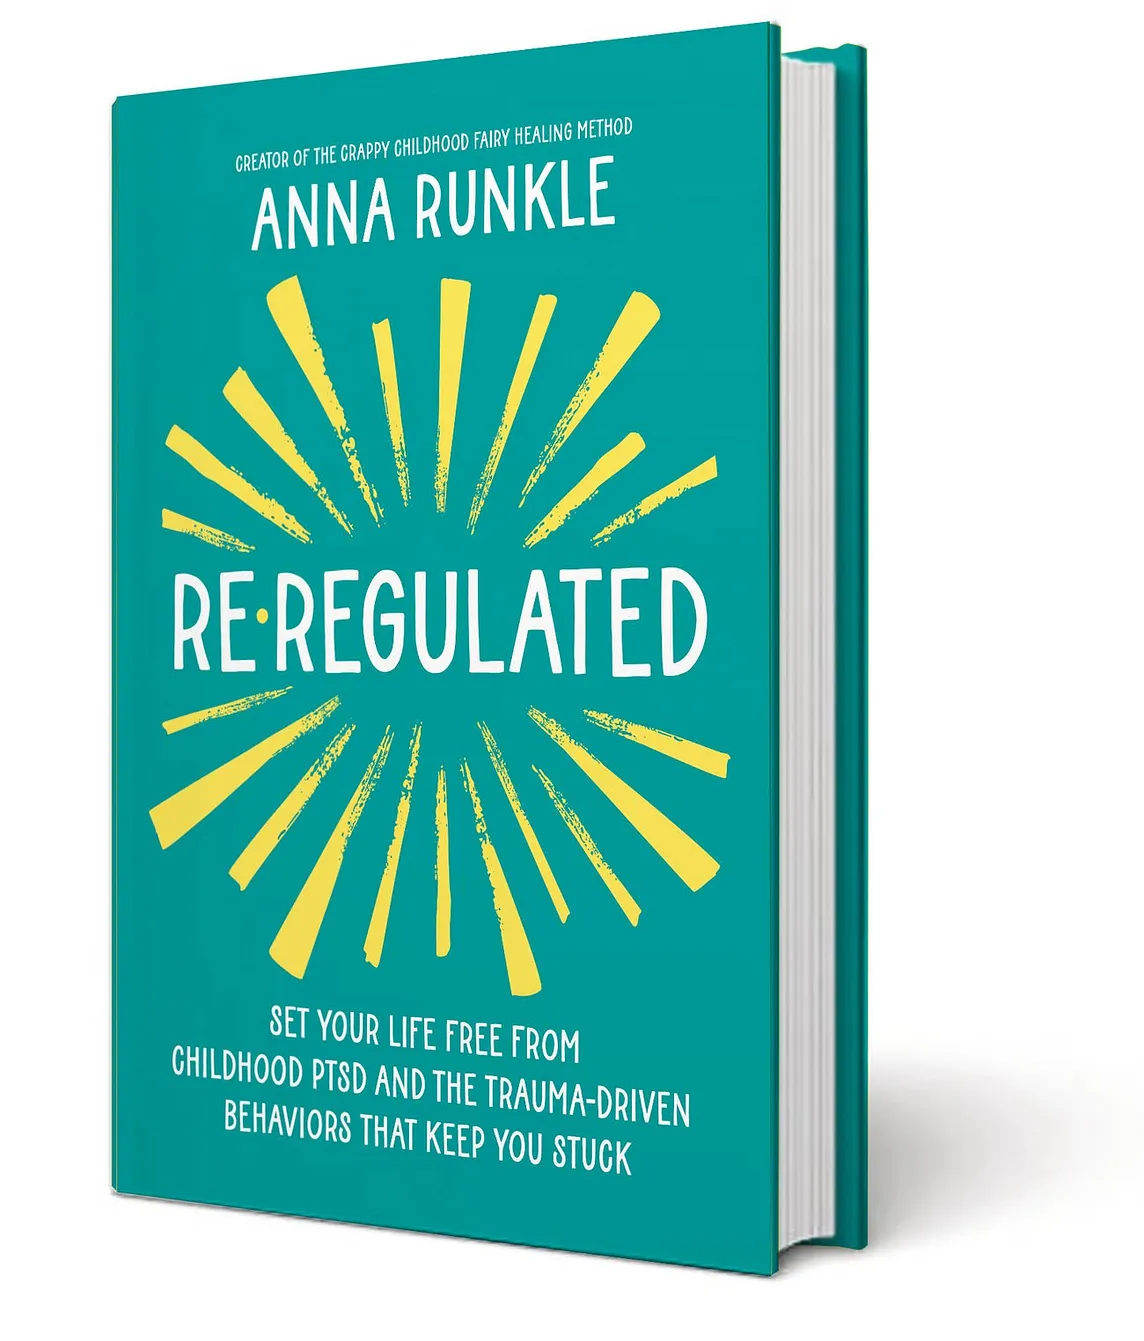 PDF Re-Regulated: Set Your Life Free from Childhood PTSD and the Trauma-Driven Behaviors That Keep You Stuck By Anna Runkle